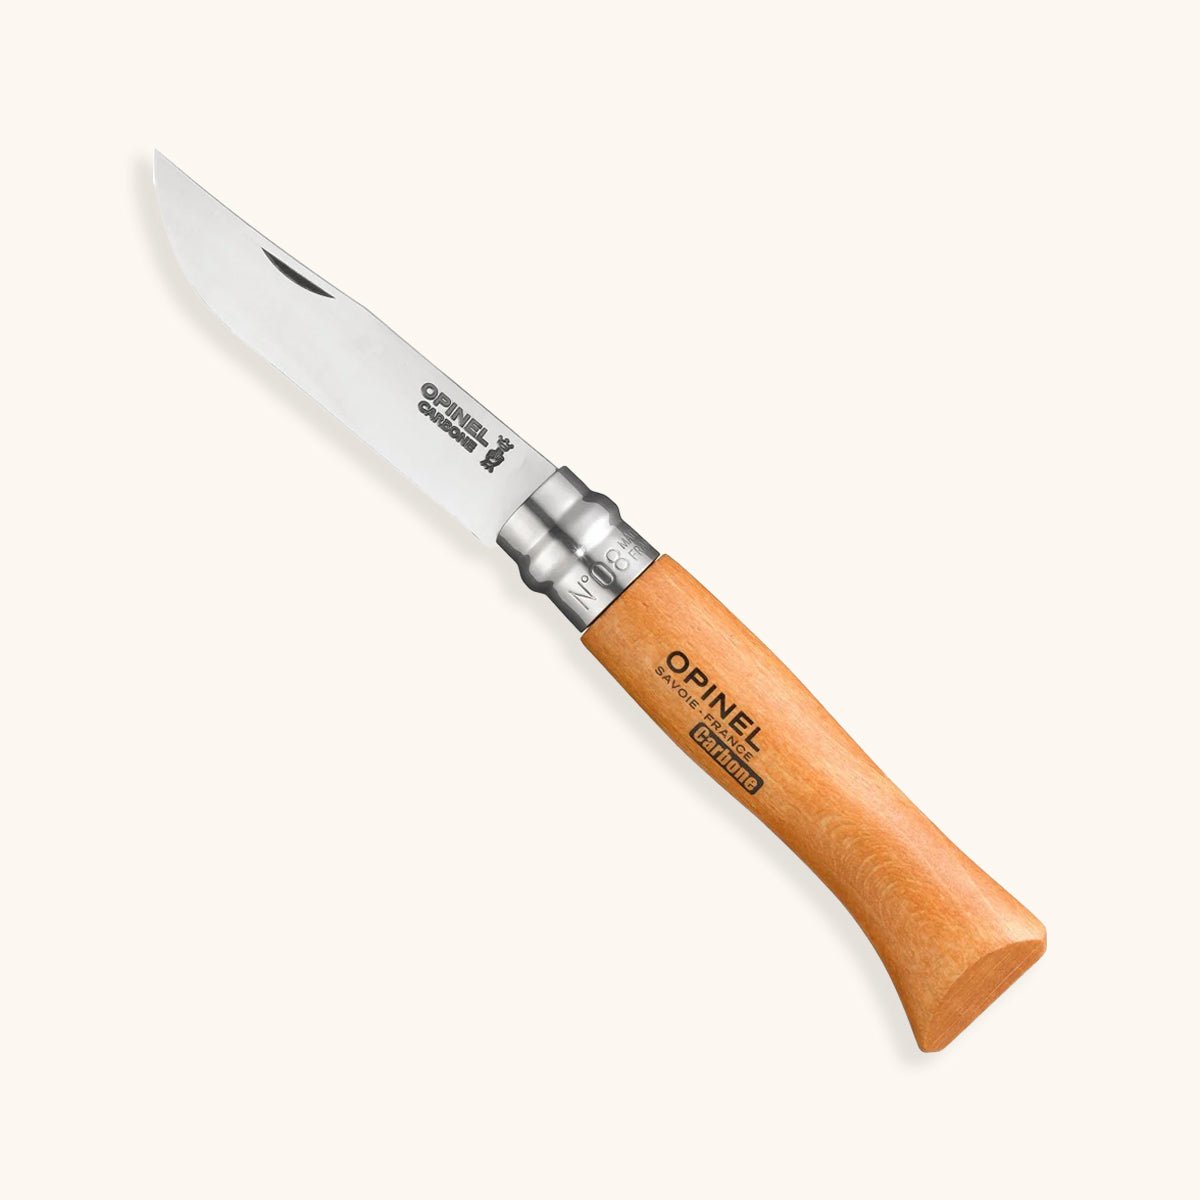 Opinel No. 8 Carbon Knife